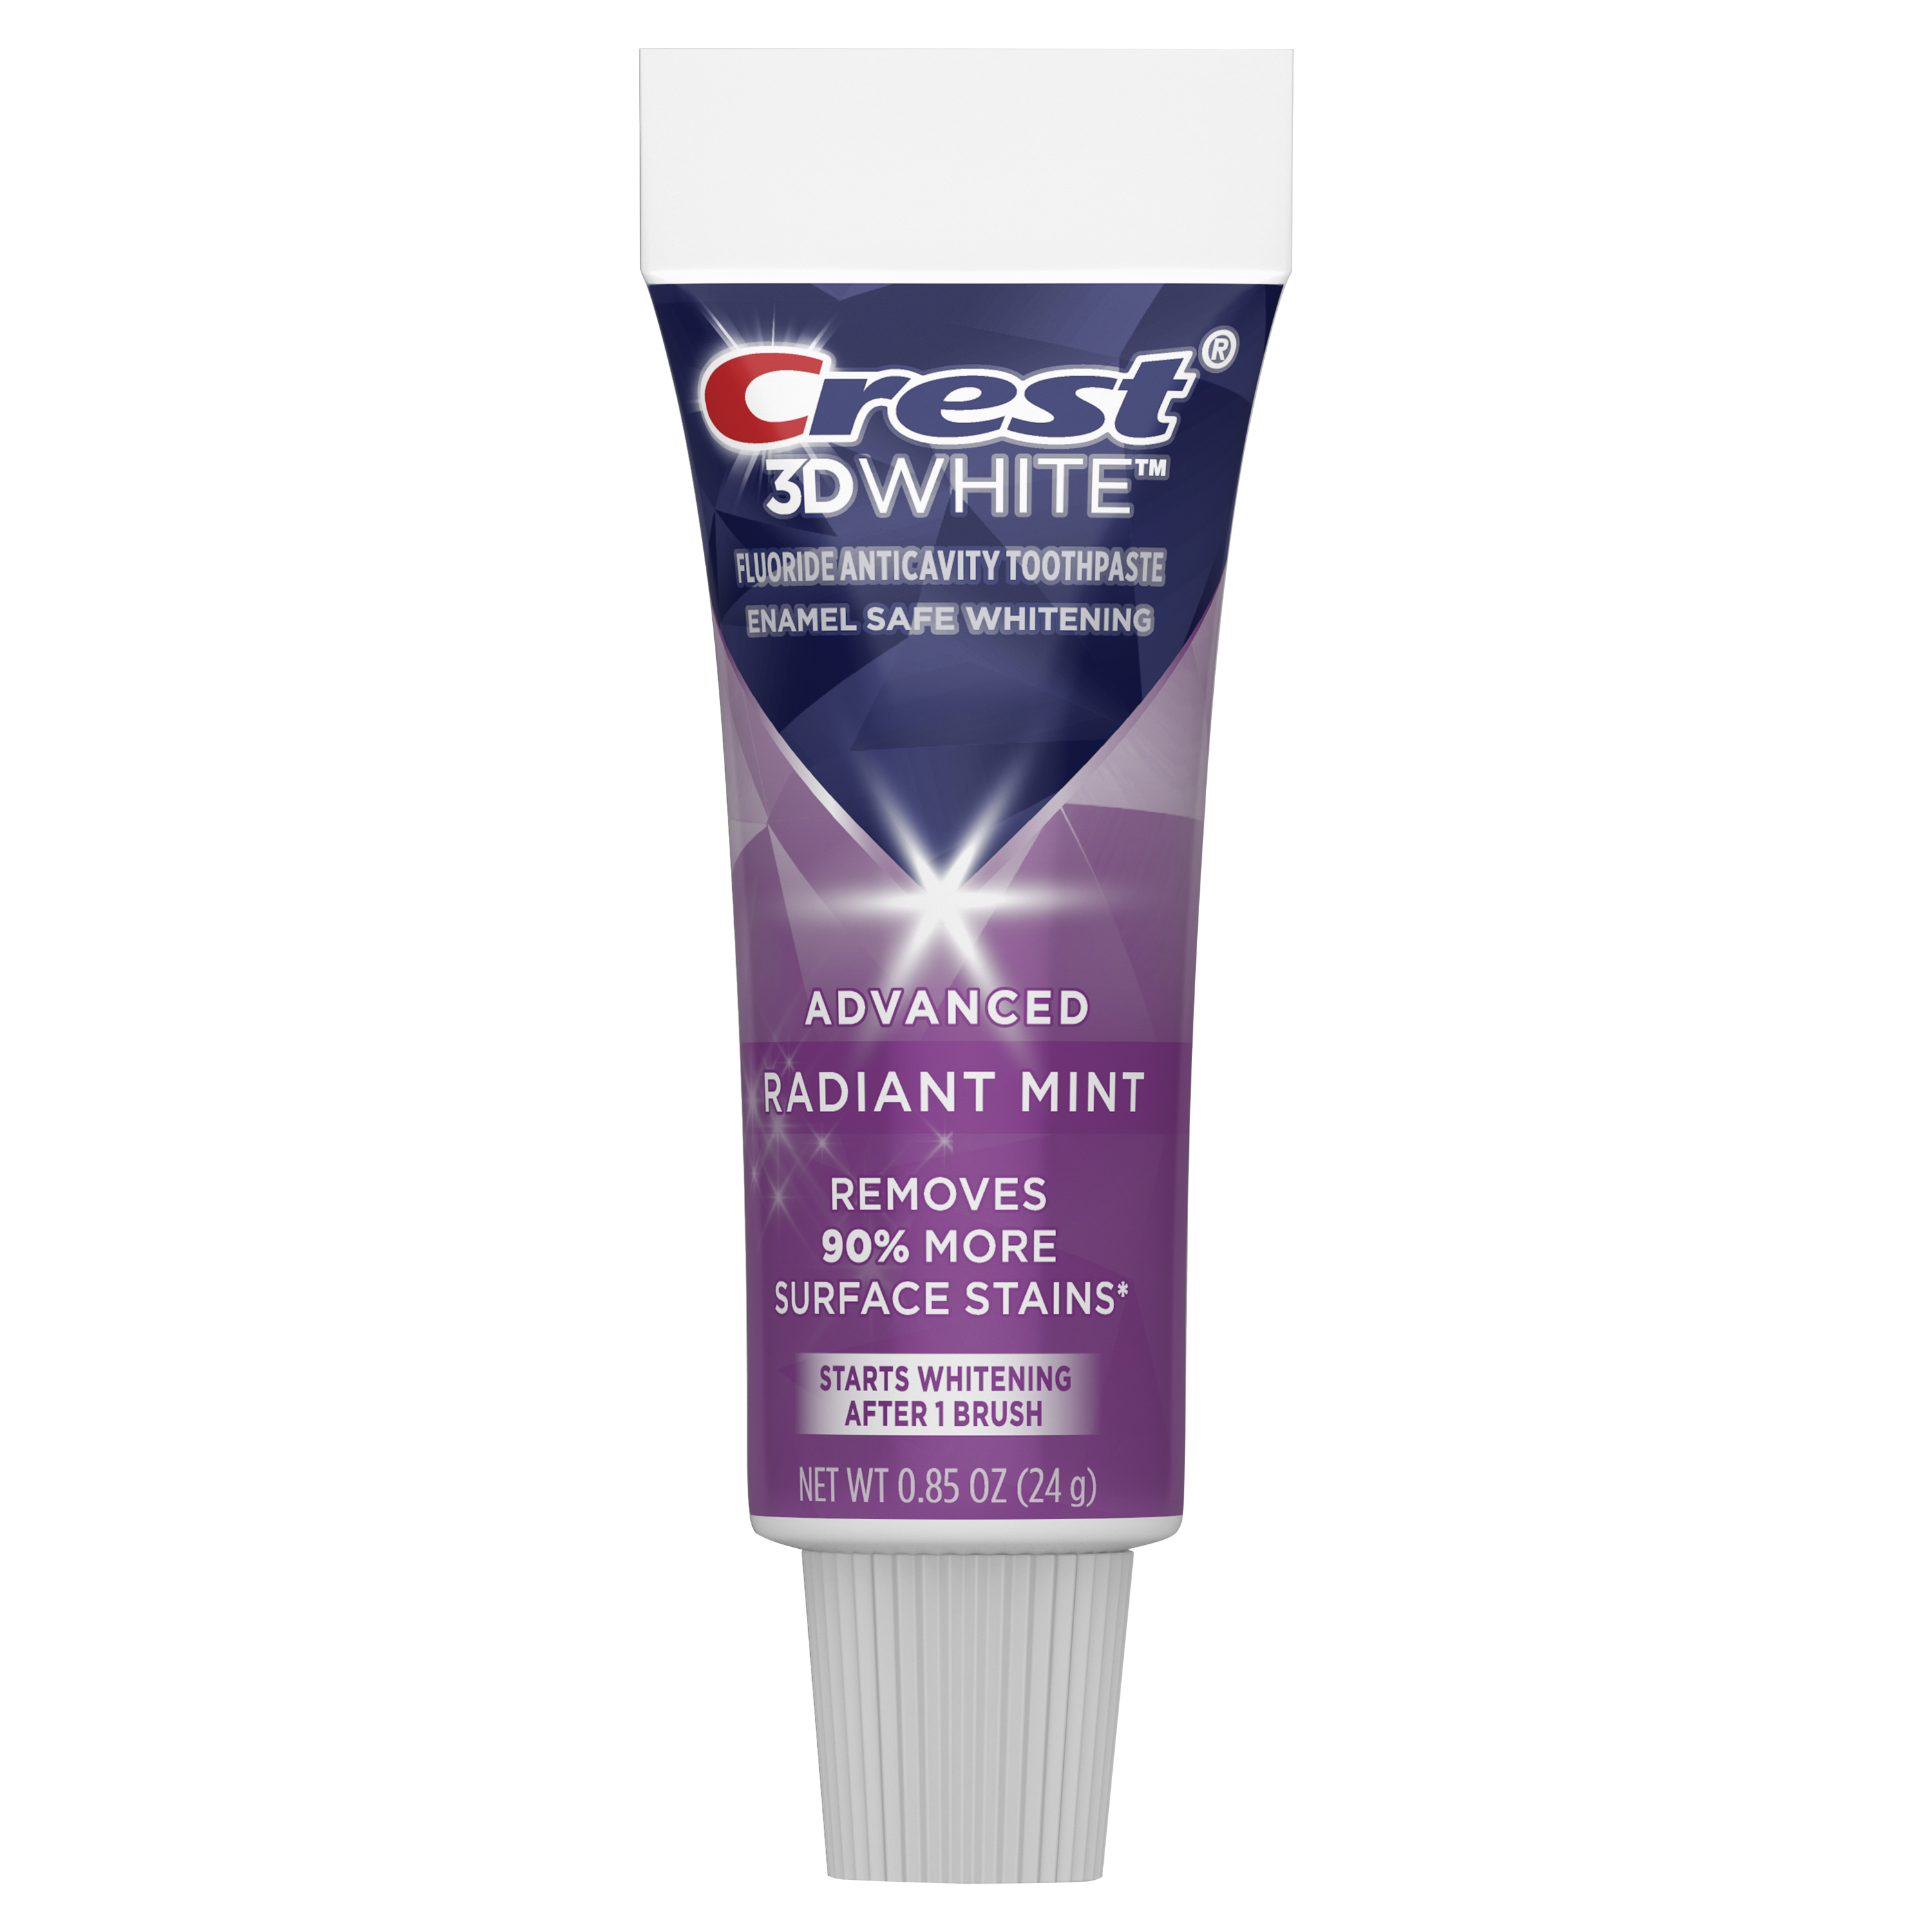 Crest 3D White Advanced Radiant Mint, Teeth Whitening Toothpaste, .85 oz - image 9 of 12